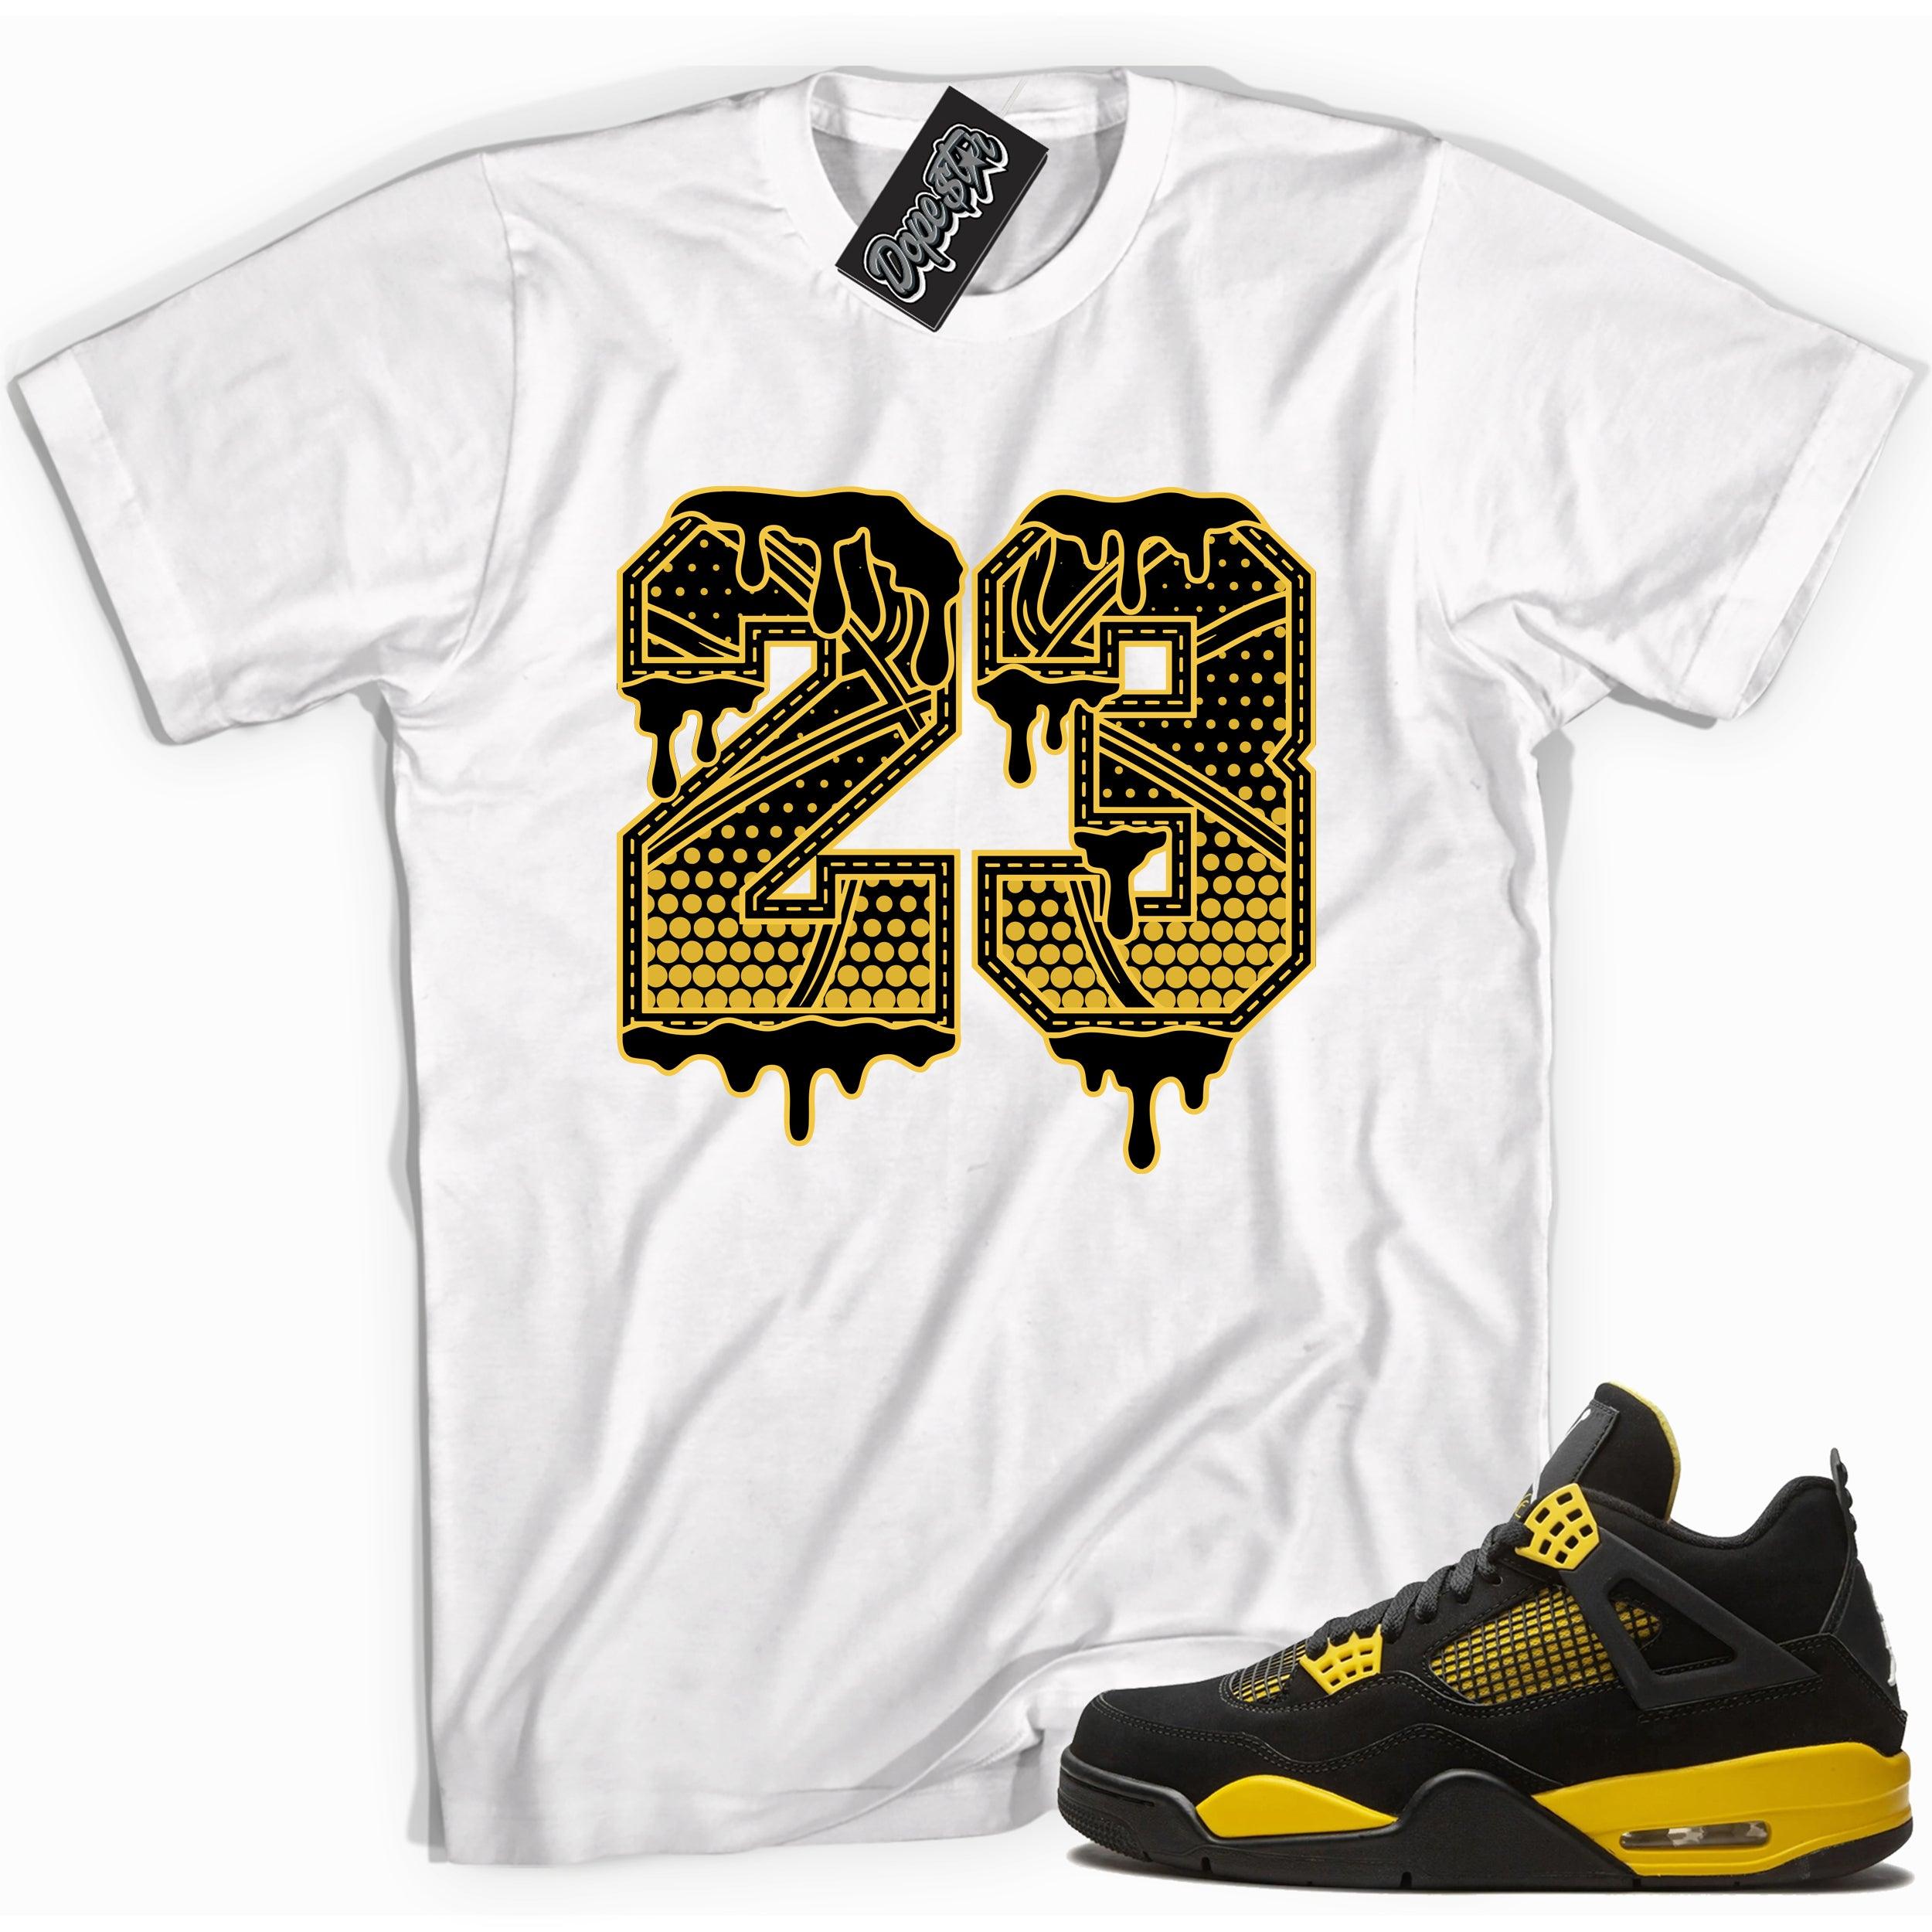 Cool white graphic tee with '23 basketball' print, that perfectly matches Air Jordan 4 Thunder sneakers